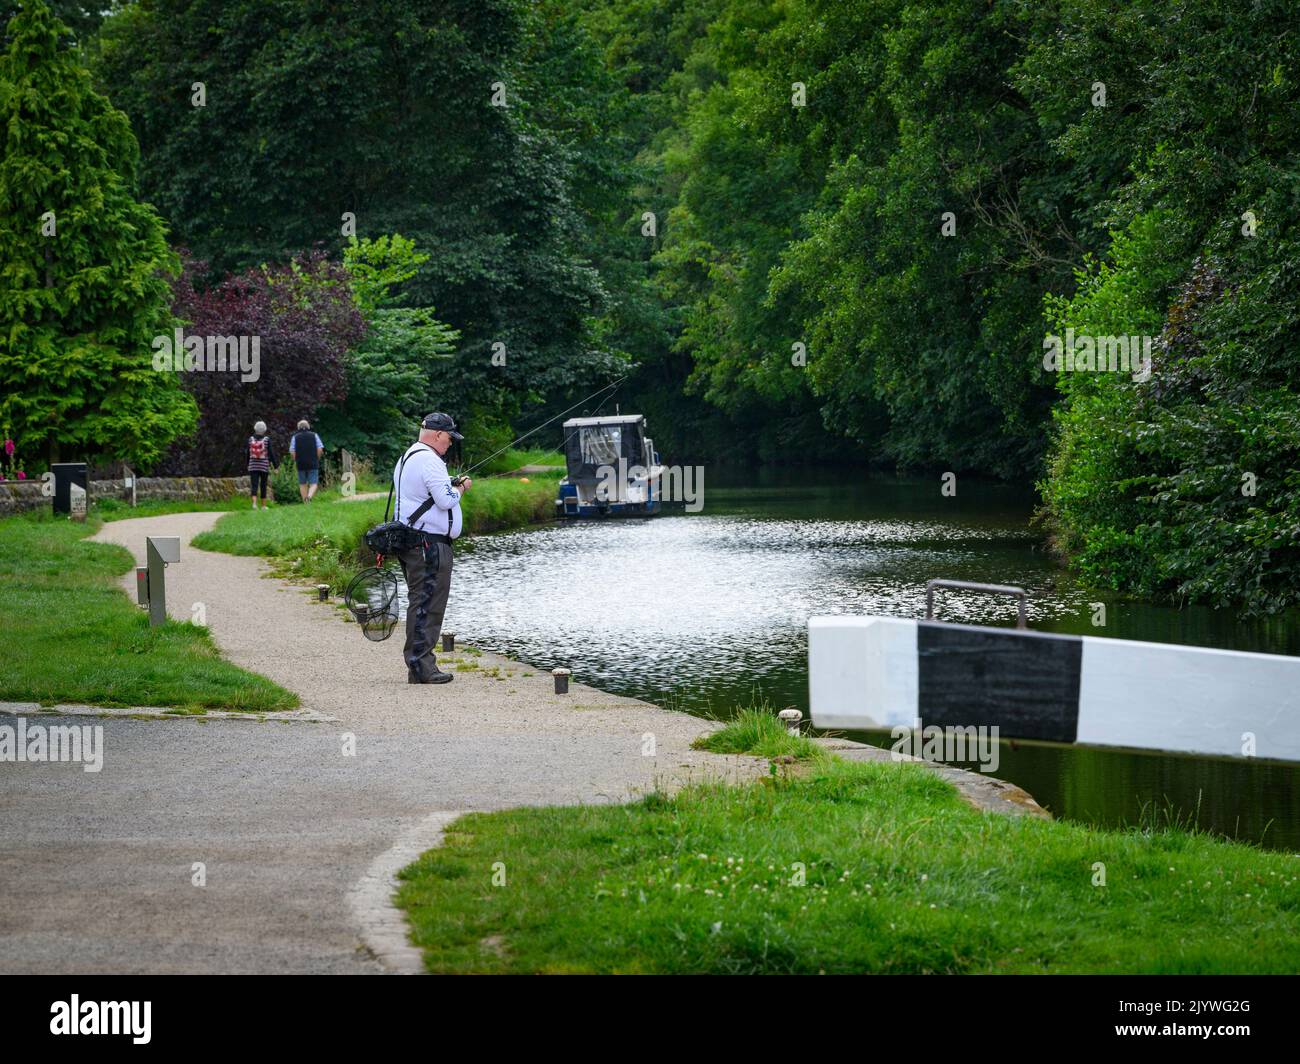 Relaxing recreational activities for people by scenic Leeds and Liverpool Canal (walkers, person angling) - Gargrave, North Yorkshire, England, UK. Stock Photo